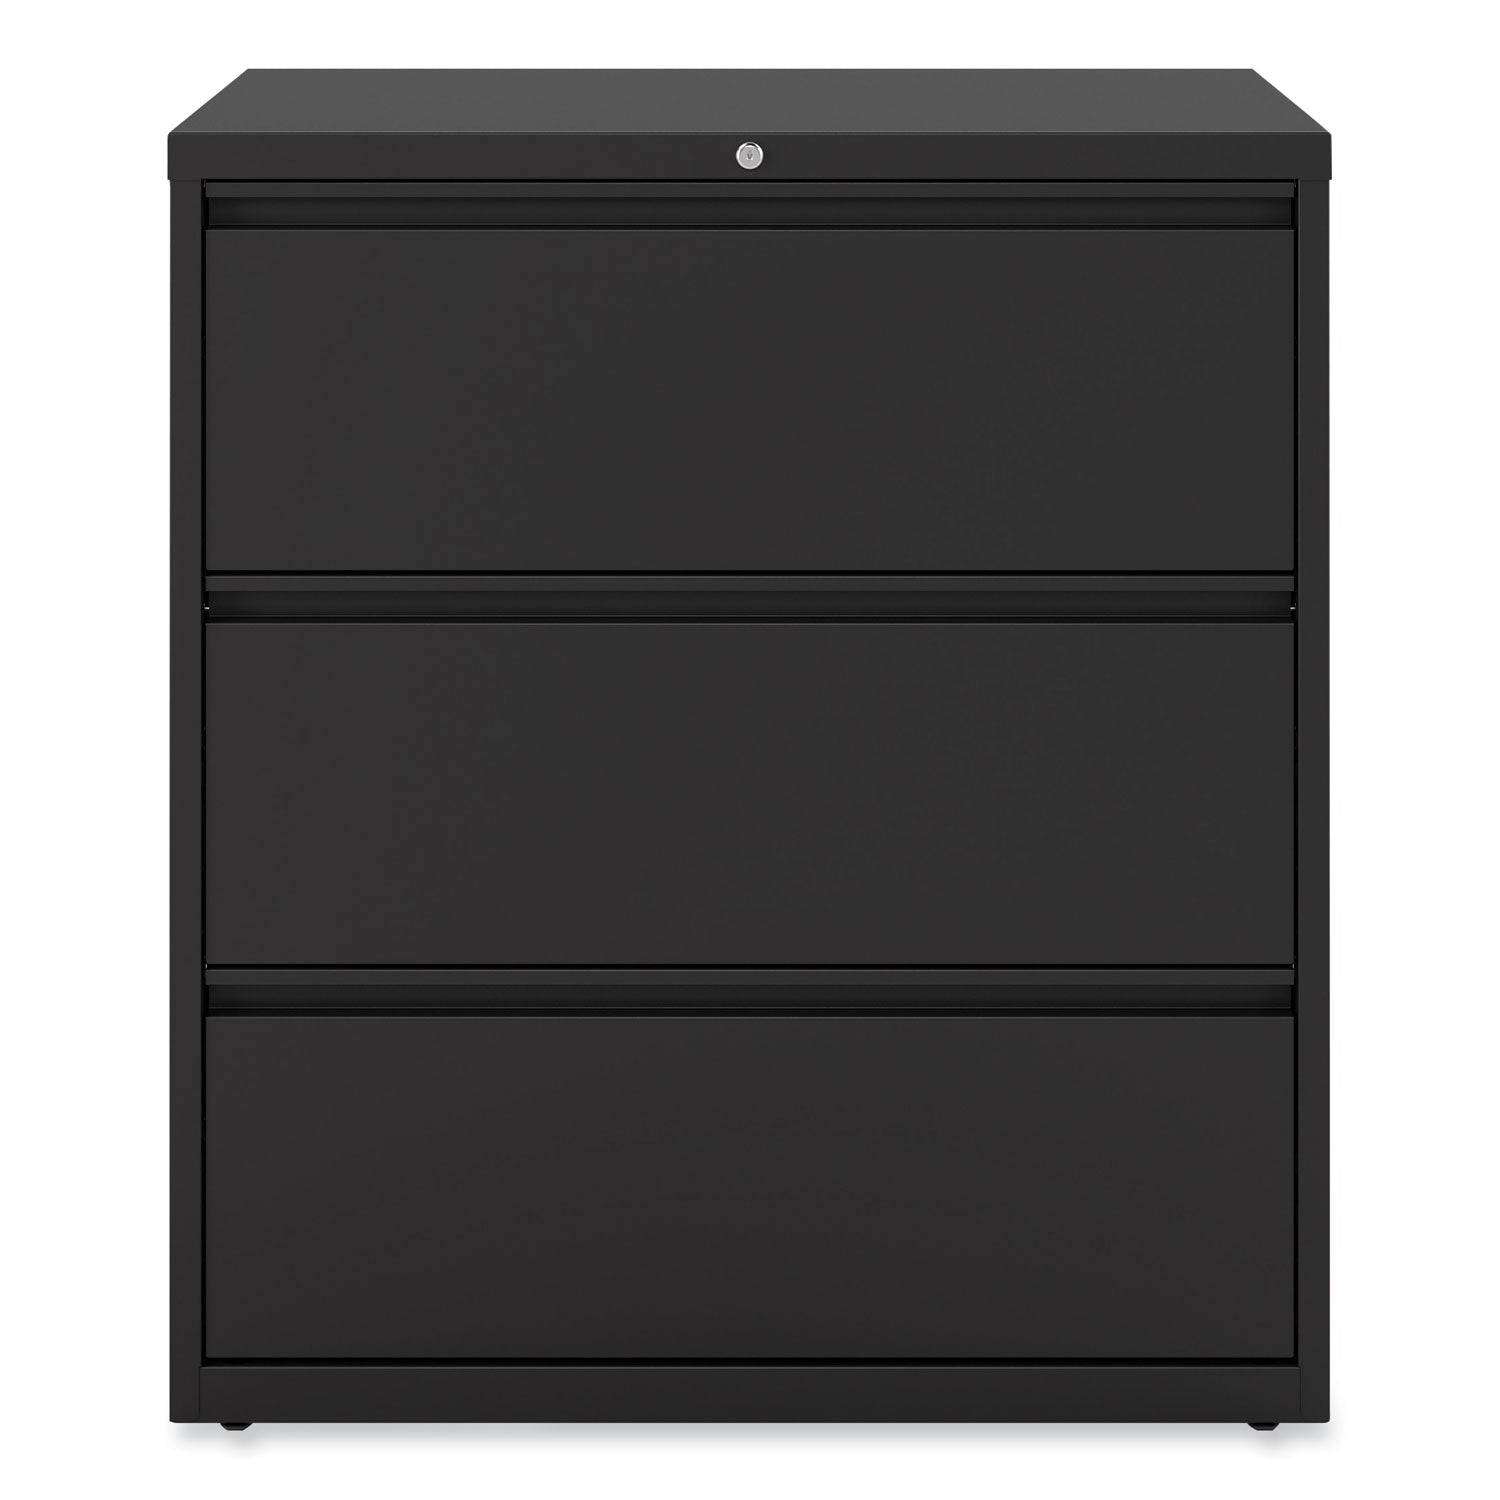 lateral-file-3-legal-letter-a4-a5-size-file-drawers-black-36-x-1863-x-4025_alehlf3641bl - 1